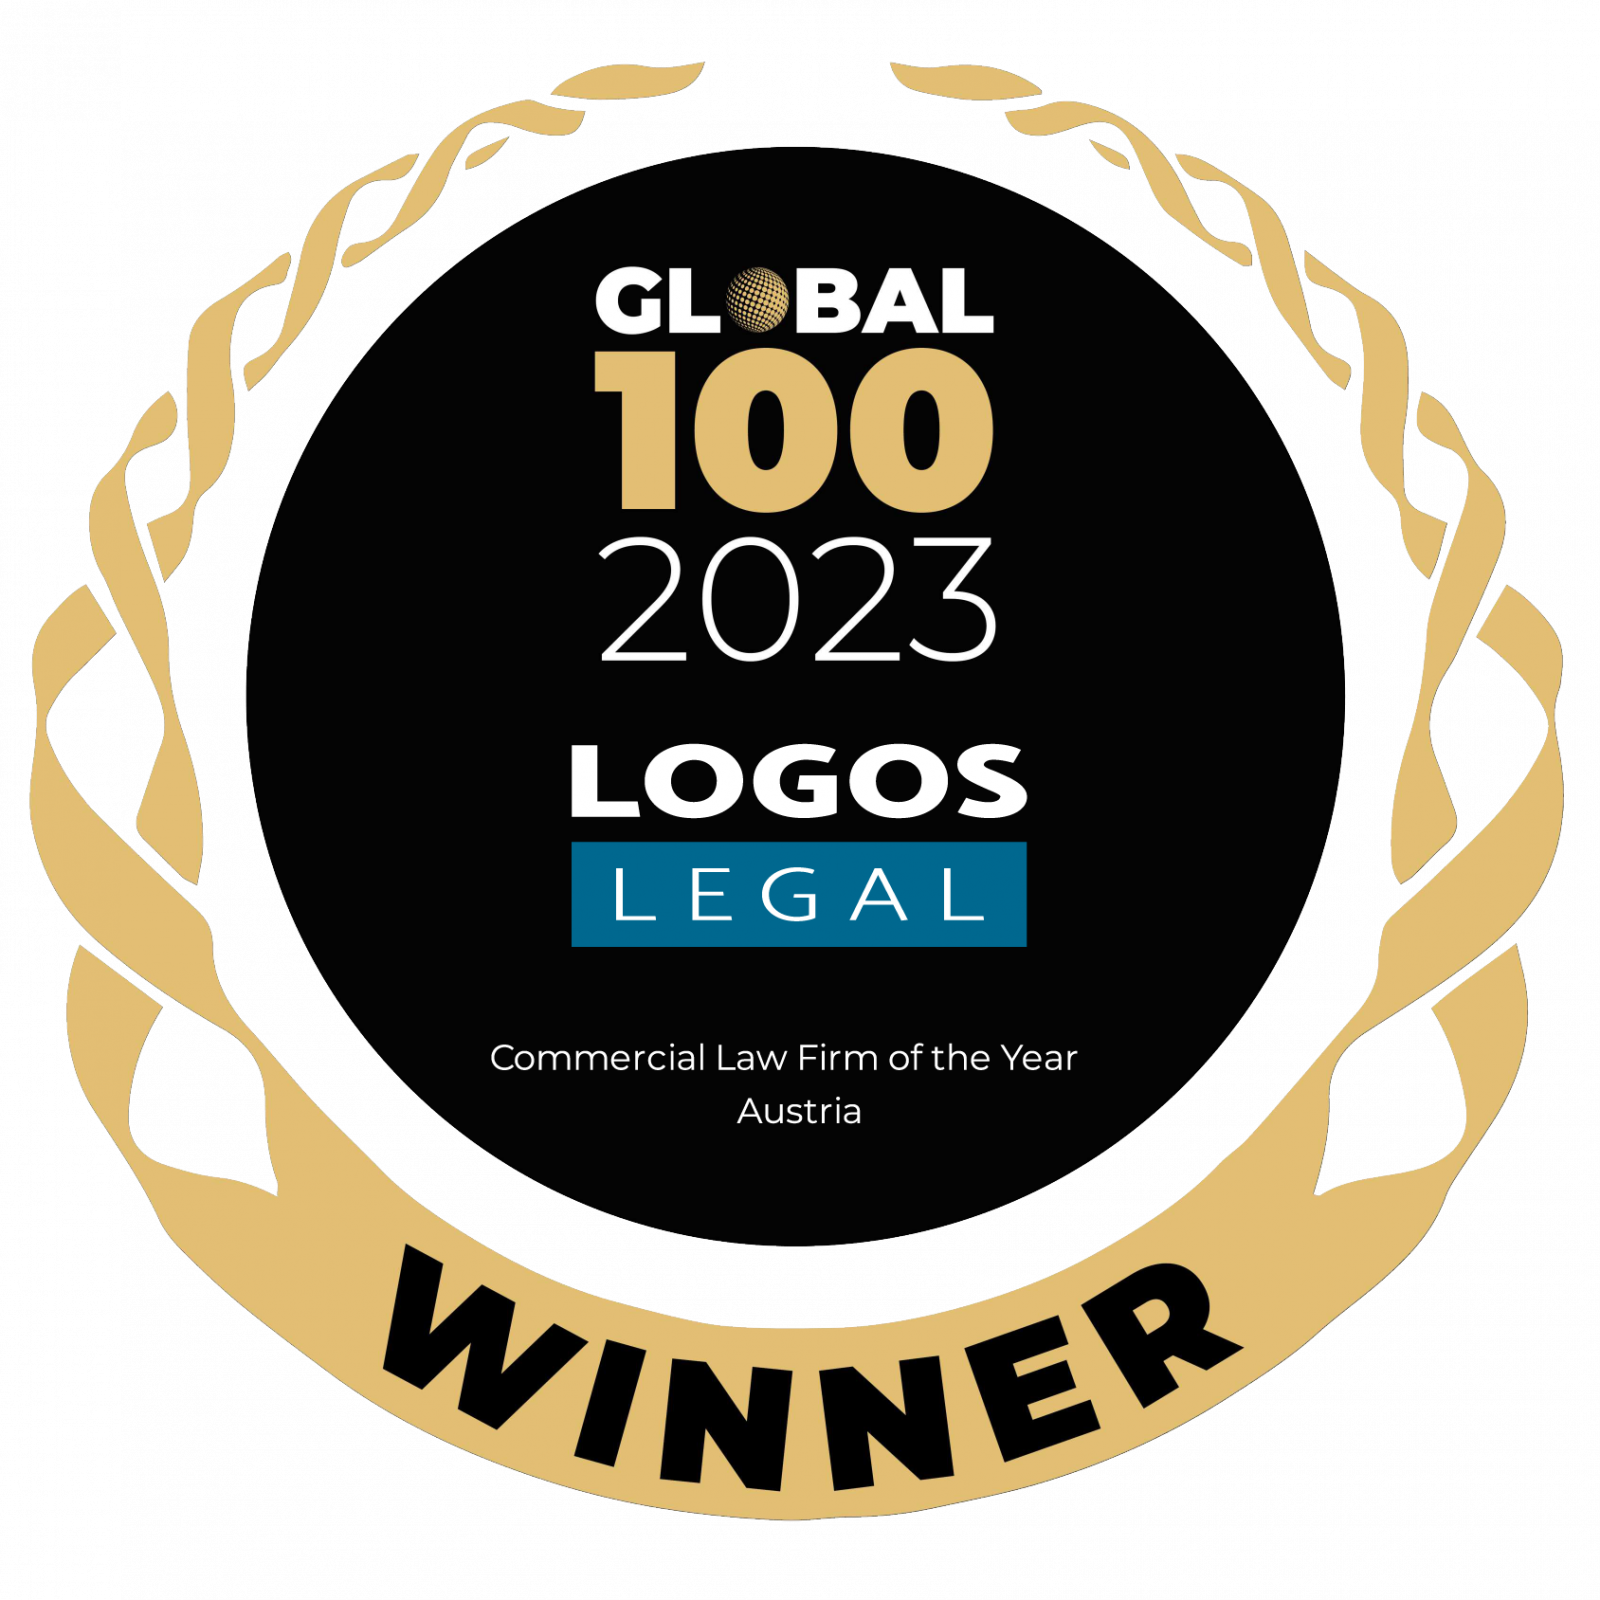 2023 Global 100 - Commercial Law Firm of the Year Austria